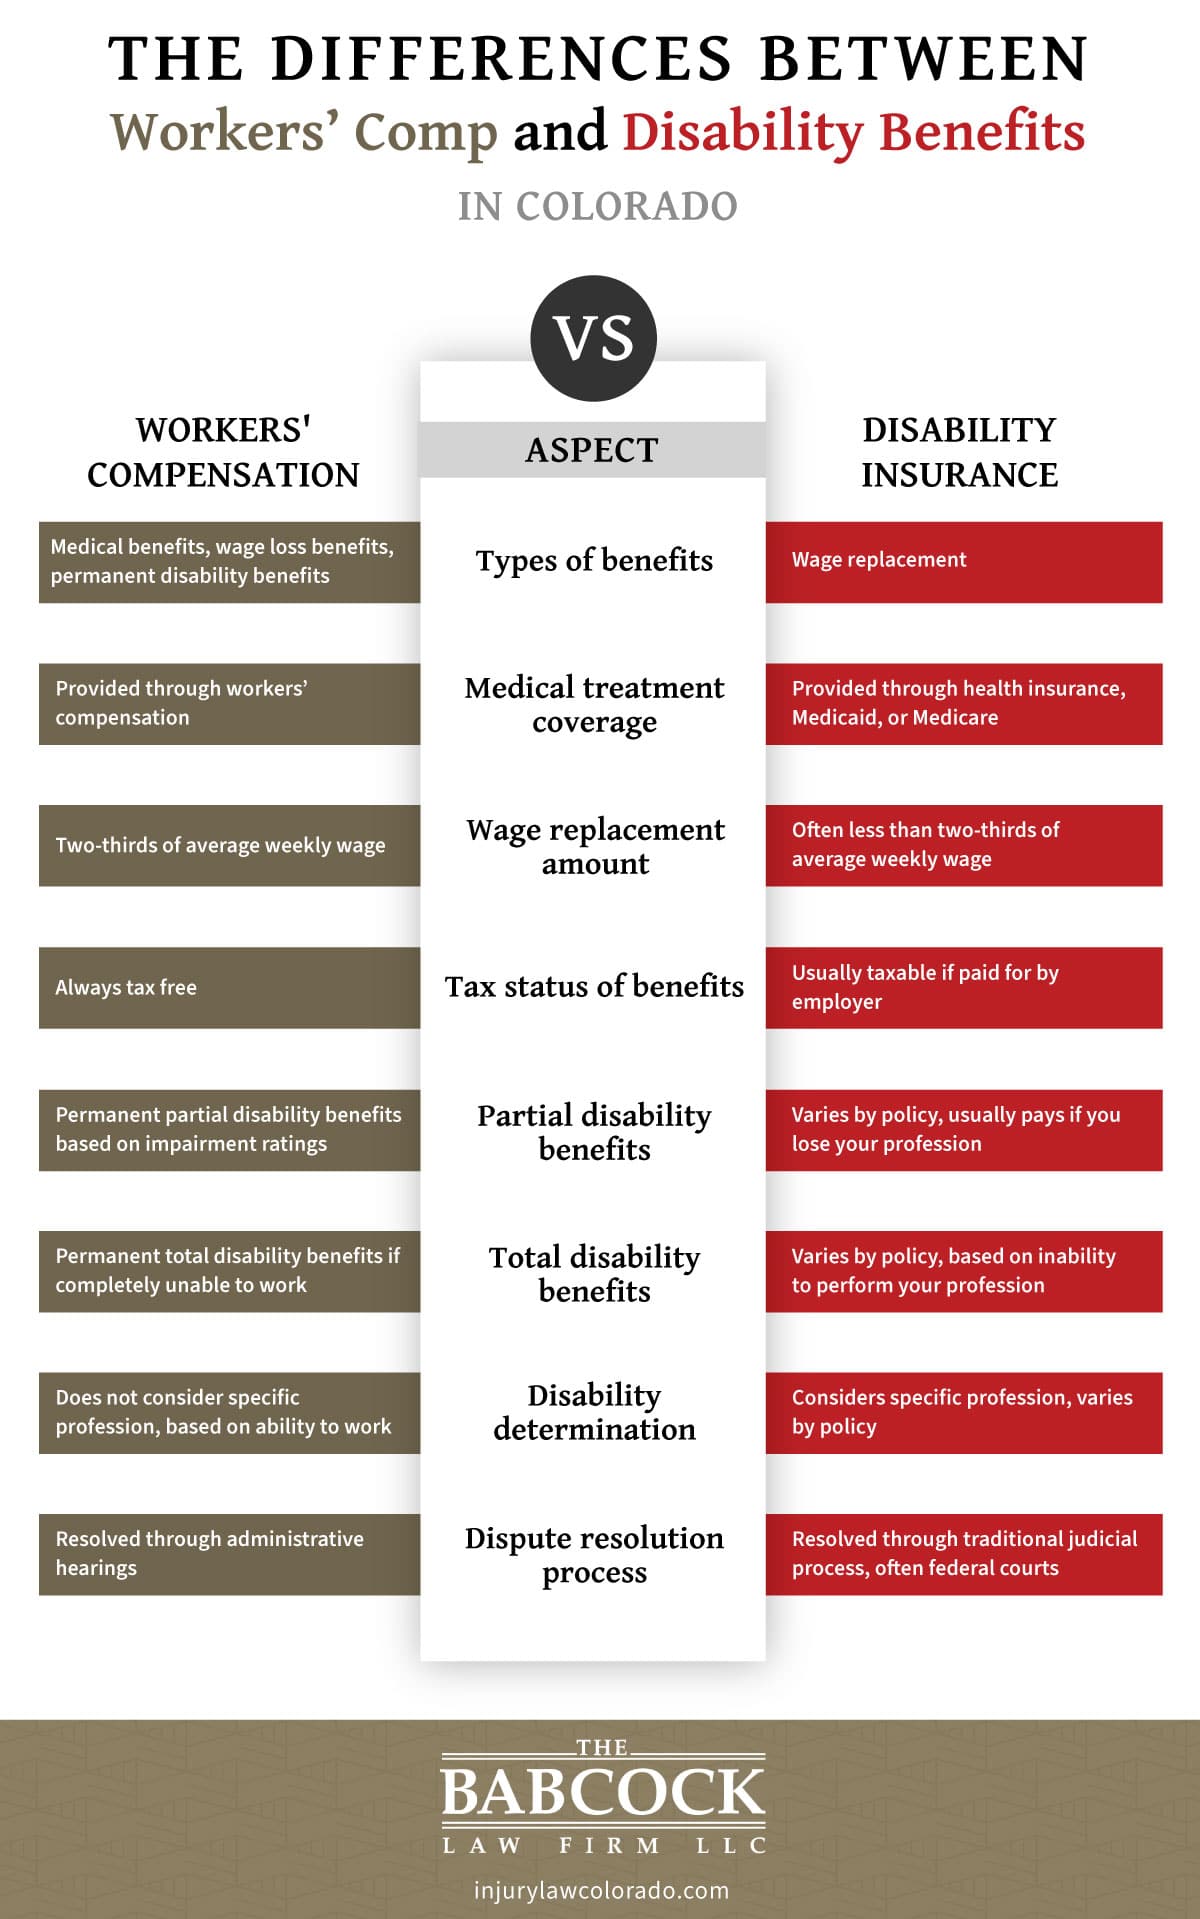 Workers' Comp vs Disability Benefits in Colorado